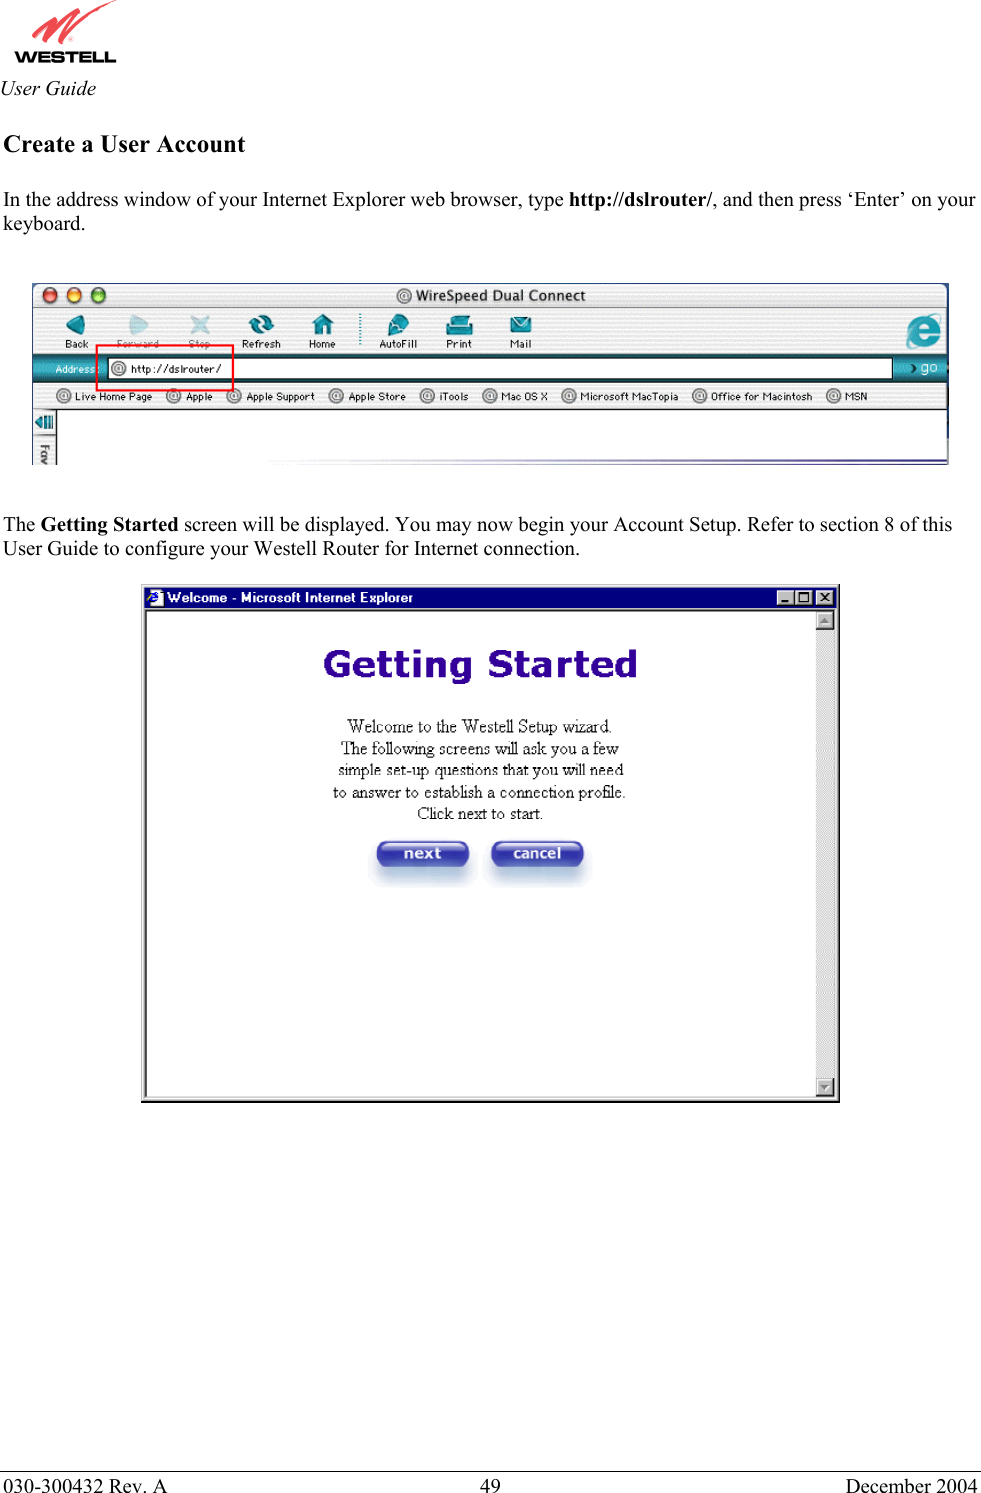       030-300432 Rev. A  49 December 2004  User Guide Create a User Account  In the address window of your Internet Explorer web browser, type http://dslrouter/, and then press ‘Enter’ on your keyboard.       The Getting Started screen will be displayed. You may now begin your Account Setup. Refer to section 8 of this User Guide to configure your Westell Router for Internet connection.     